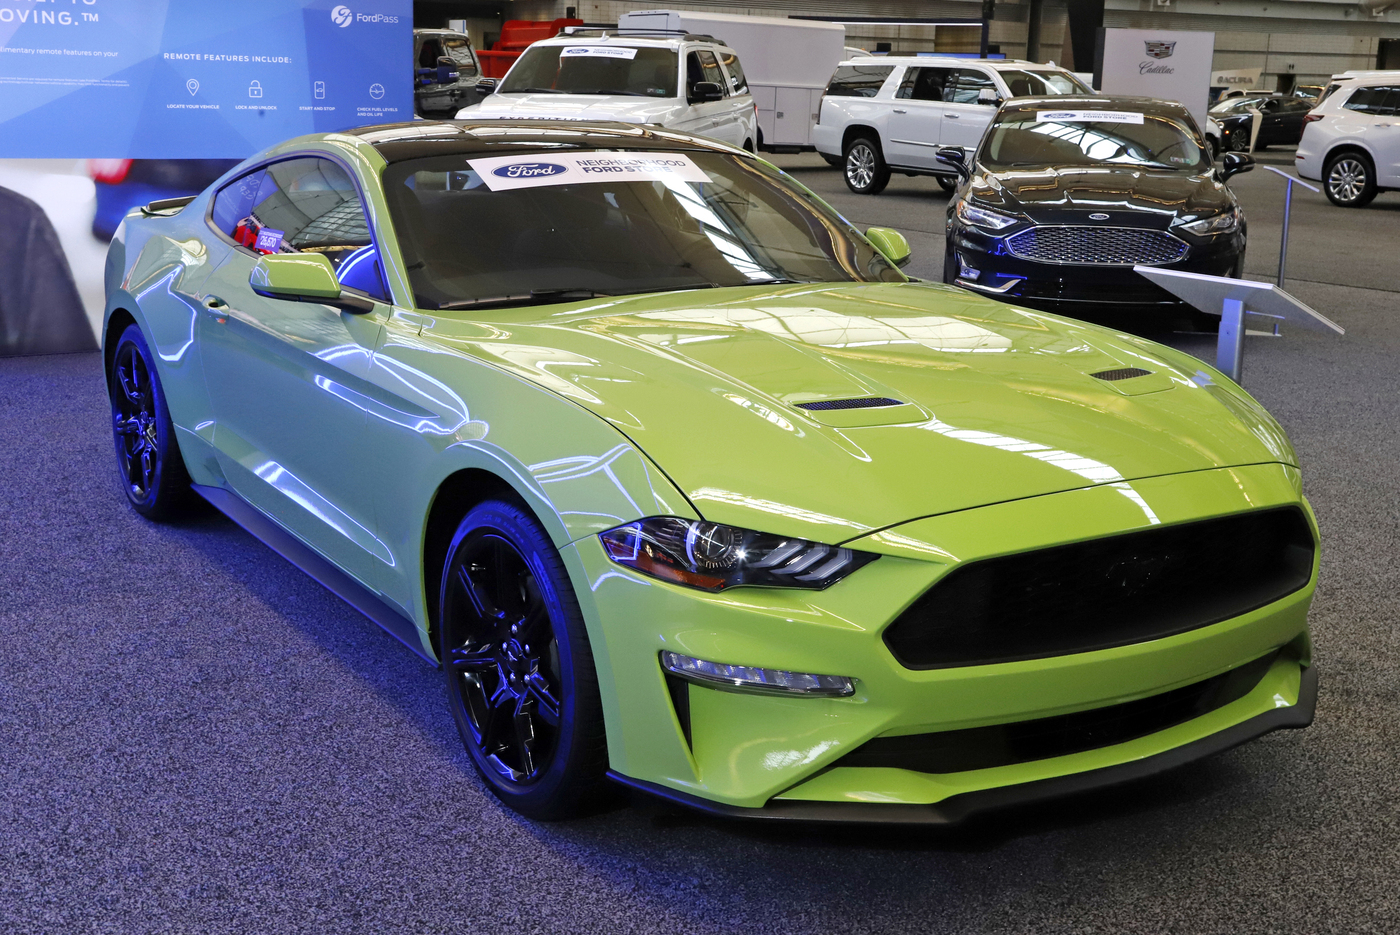 This is a 2020 Ford Mustang Ecoboost Coupe on display at the 2020 Pittsburgh International Auto Show Thursday, Feb.13, 2020 in Pittsburgh. (AP Photo/Gene J. Puskar)